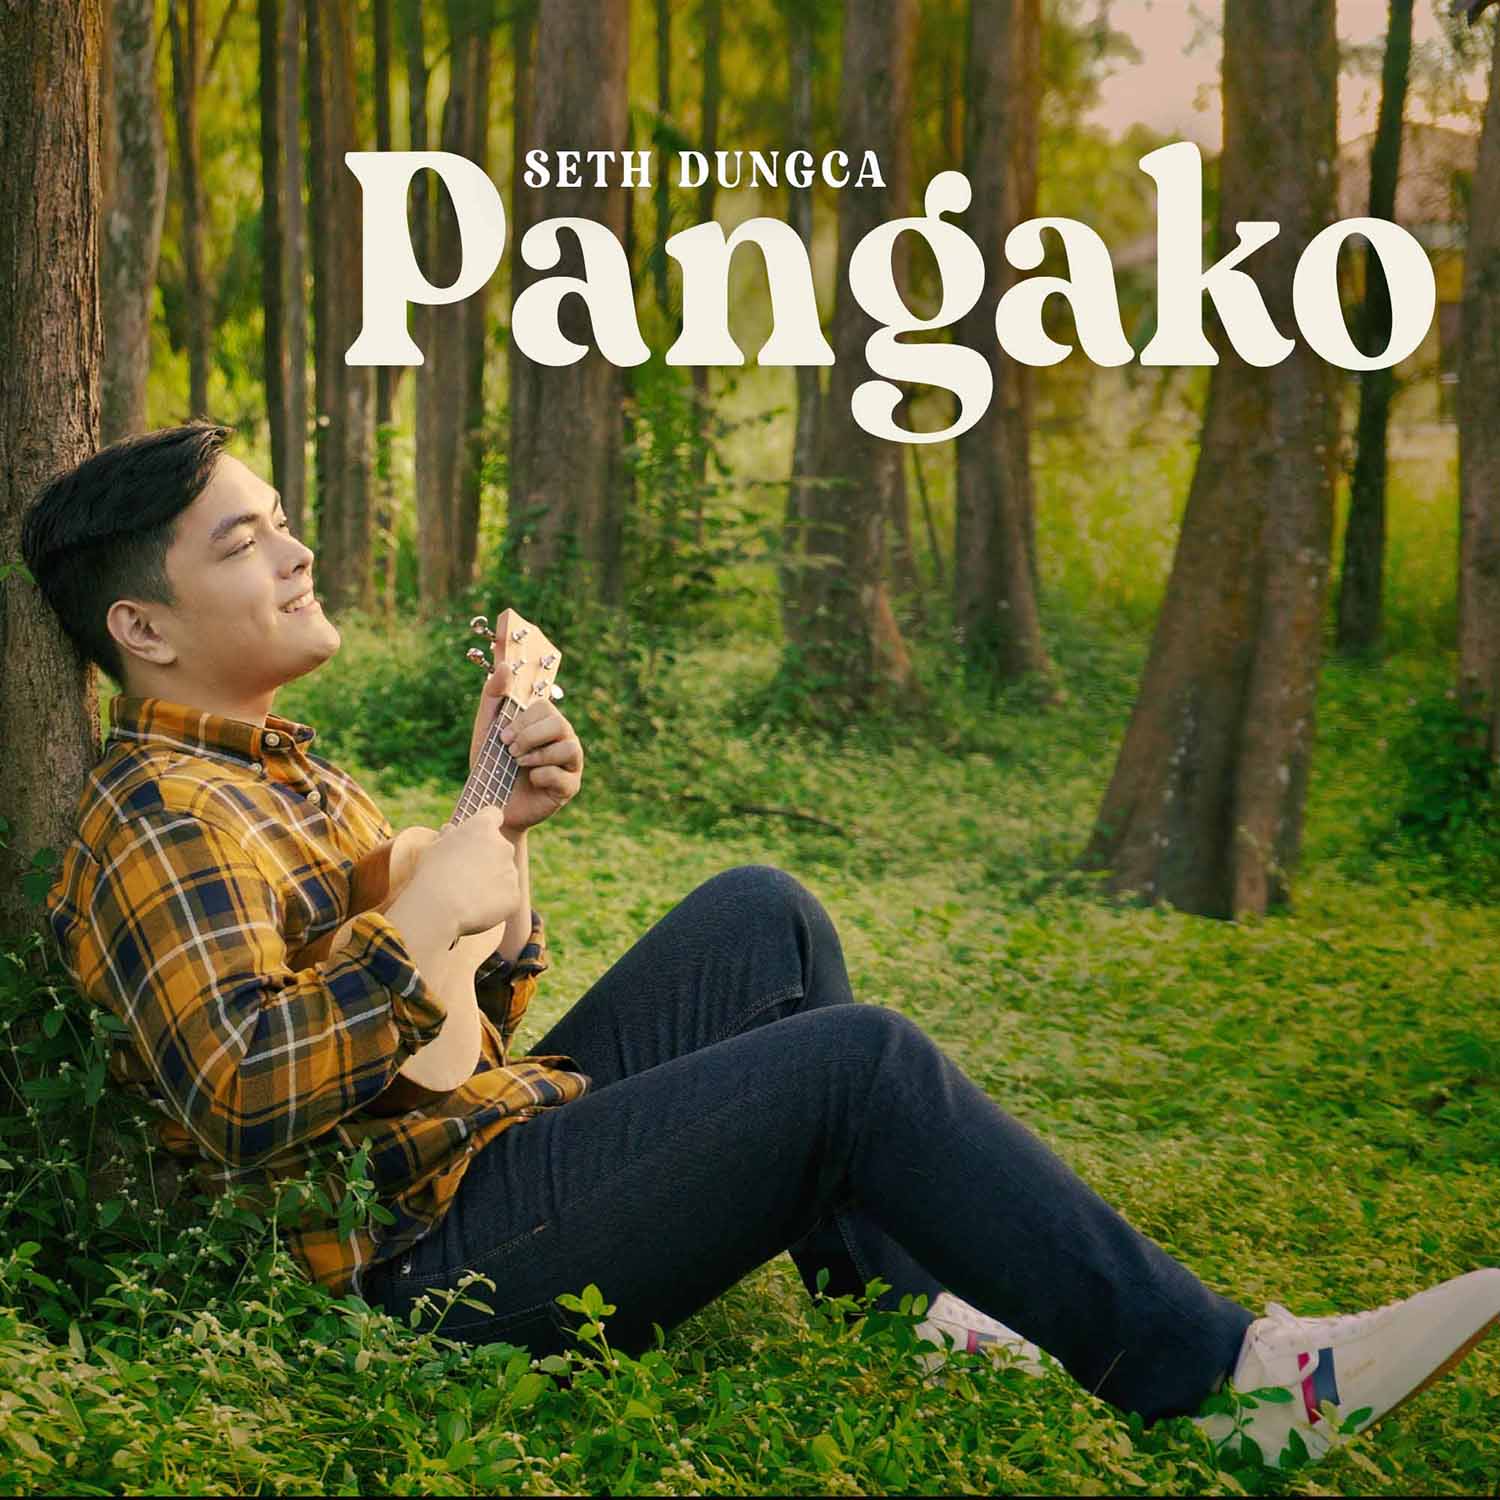 Seth Dungca’s “Pangako” breaks world record  for the most music videos made for a song